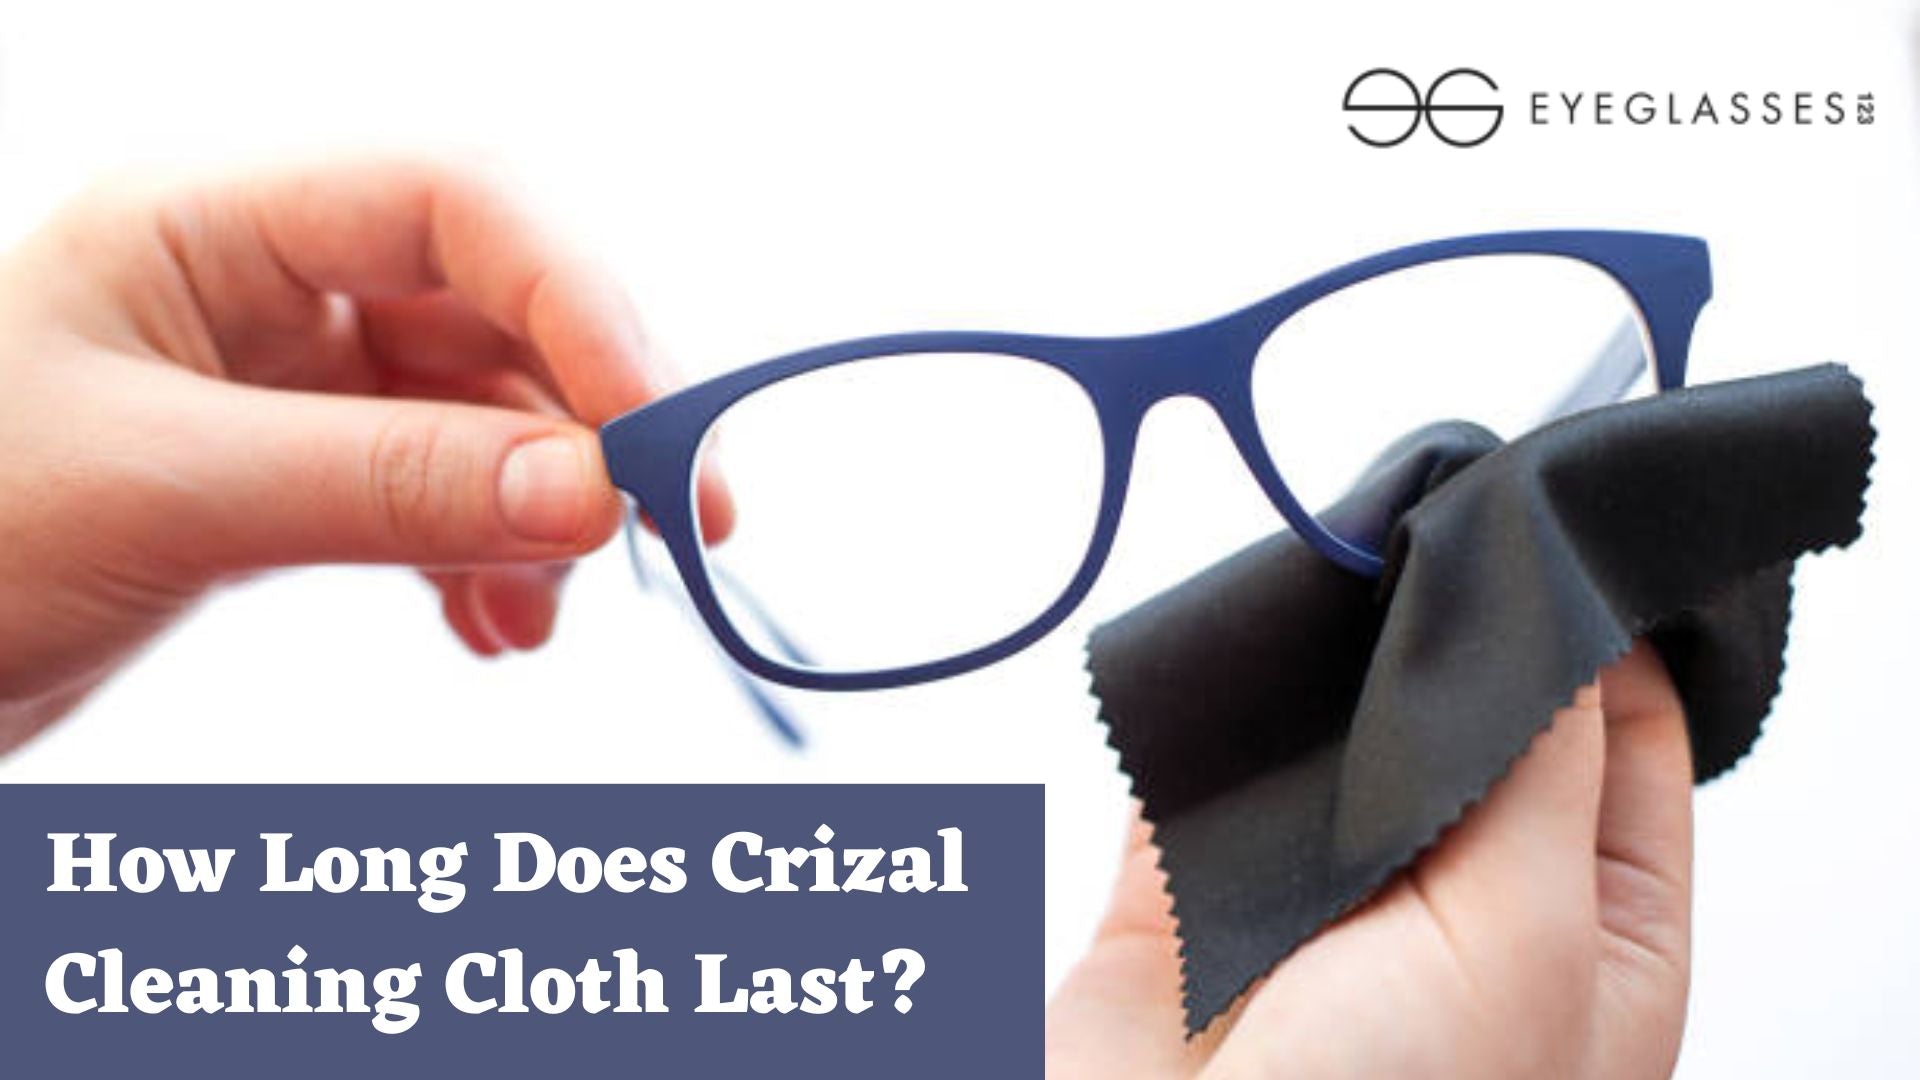 How Long Does Crizal Cleaning Cloth Last?